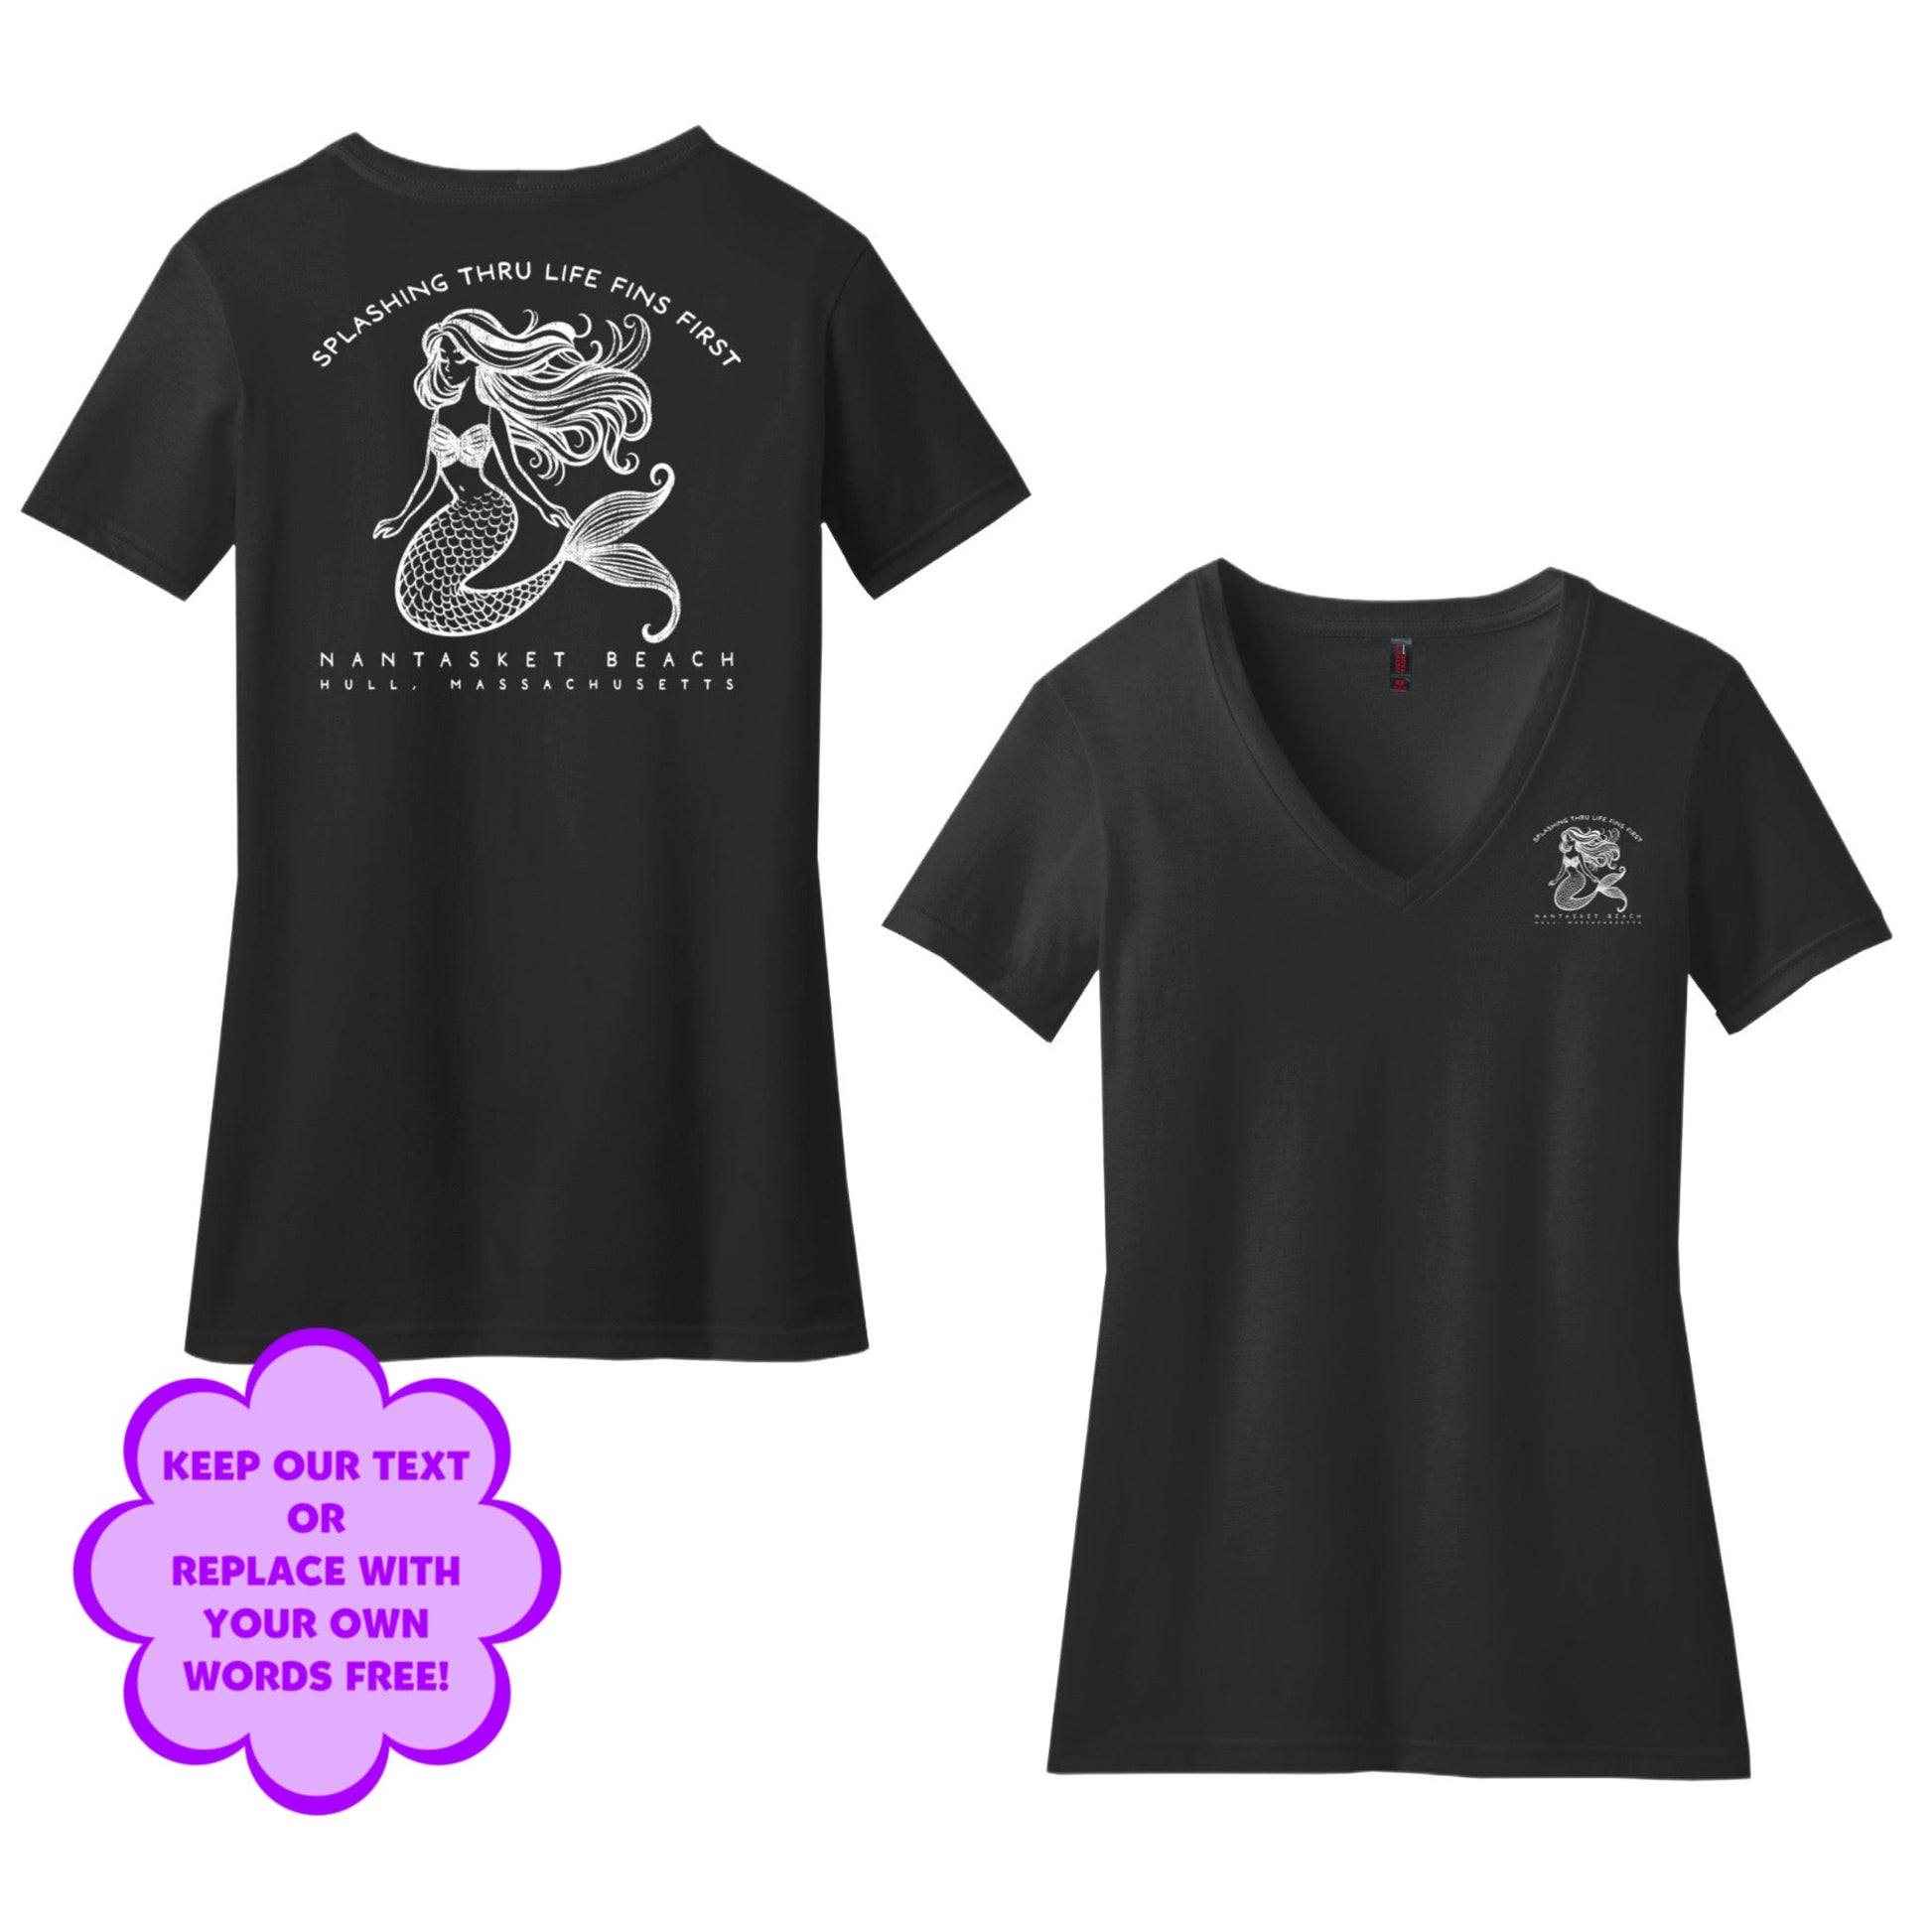 Personalize Free Beach Mermaids, Hull, Women’s Cotton Tees from Baby Squid Ink 